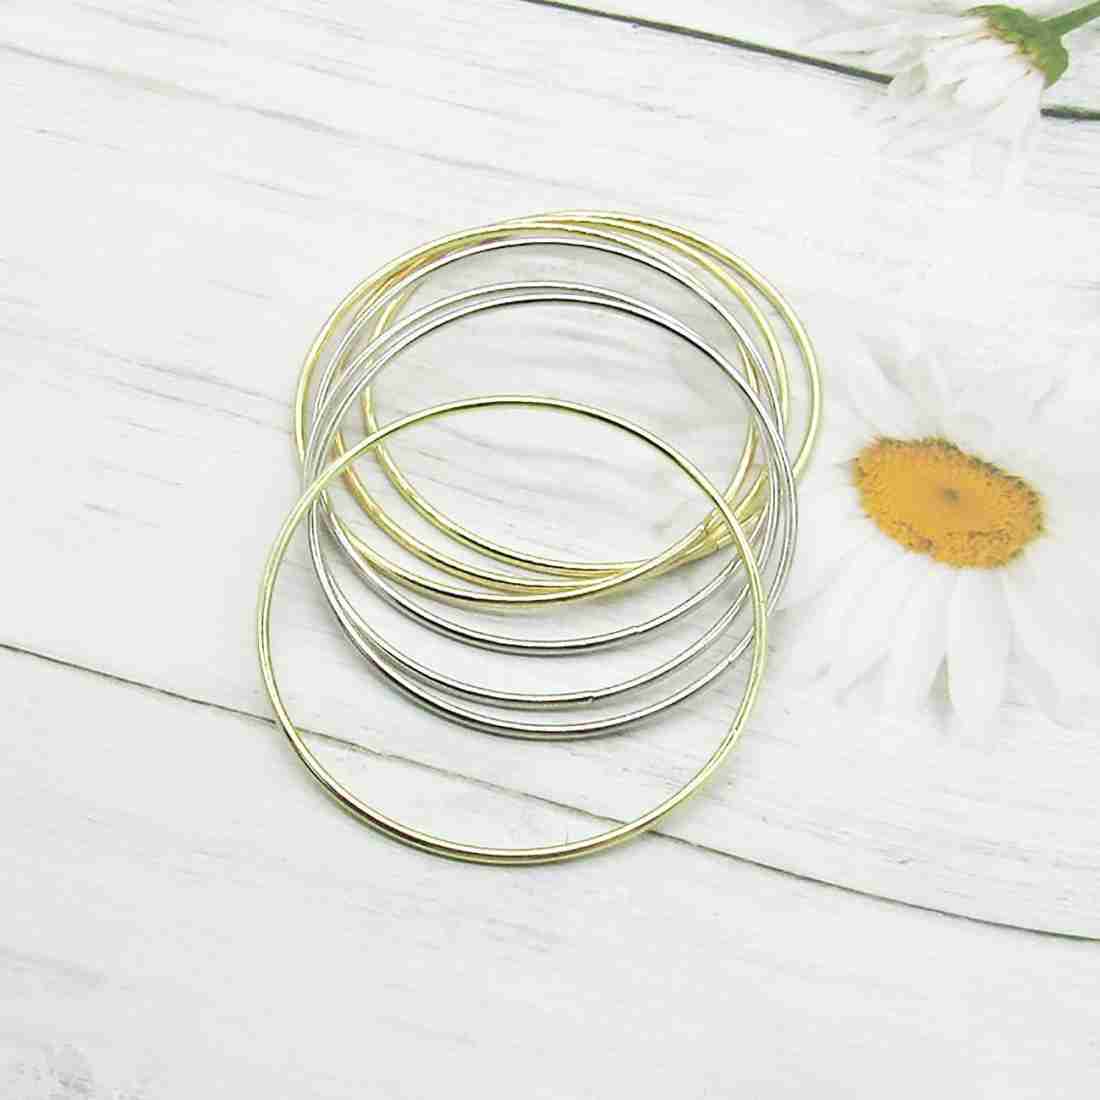 5 Pack Floral Hoop Dream Catcher Metal Rings,Gold Metal Rings Hoops Macrame  Rings for DIY Crafting Dream Catcher and Crafts(6 Inch) : : Home